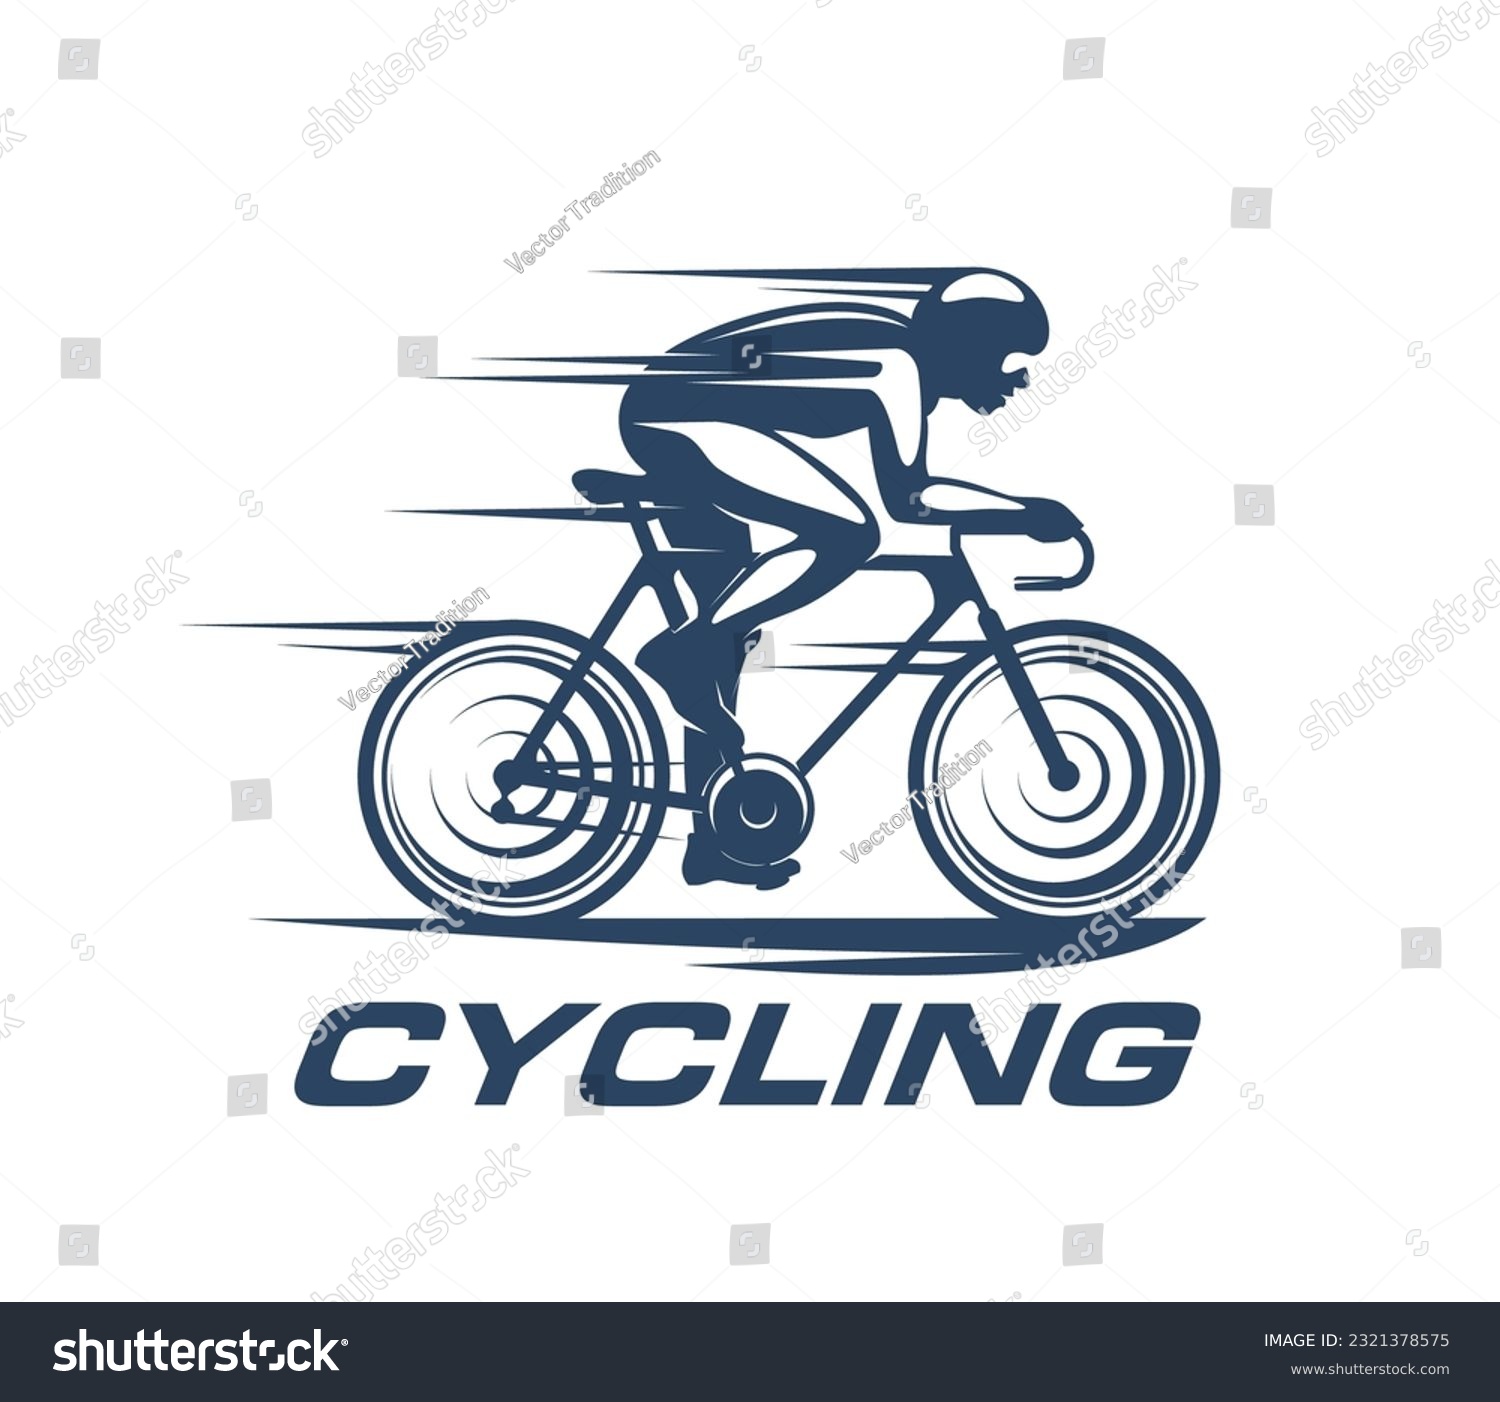 Cycling sport icon, bike racer silhouette or cyclist, bicycle sport team vector sign. Cycling sport tour of bike racing competition emblem with cyclist silhouette in helmet riding in speed line #2321378575